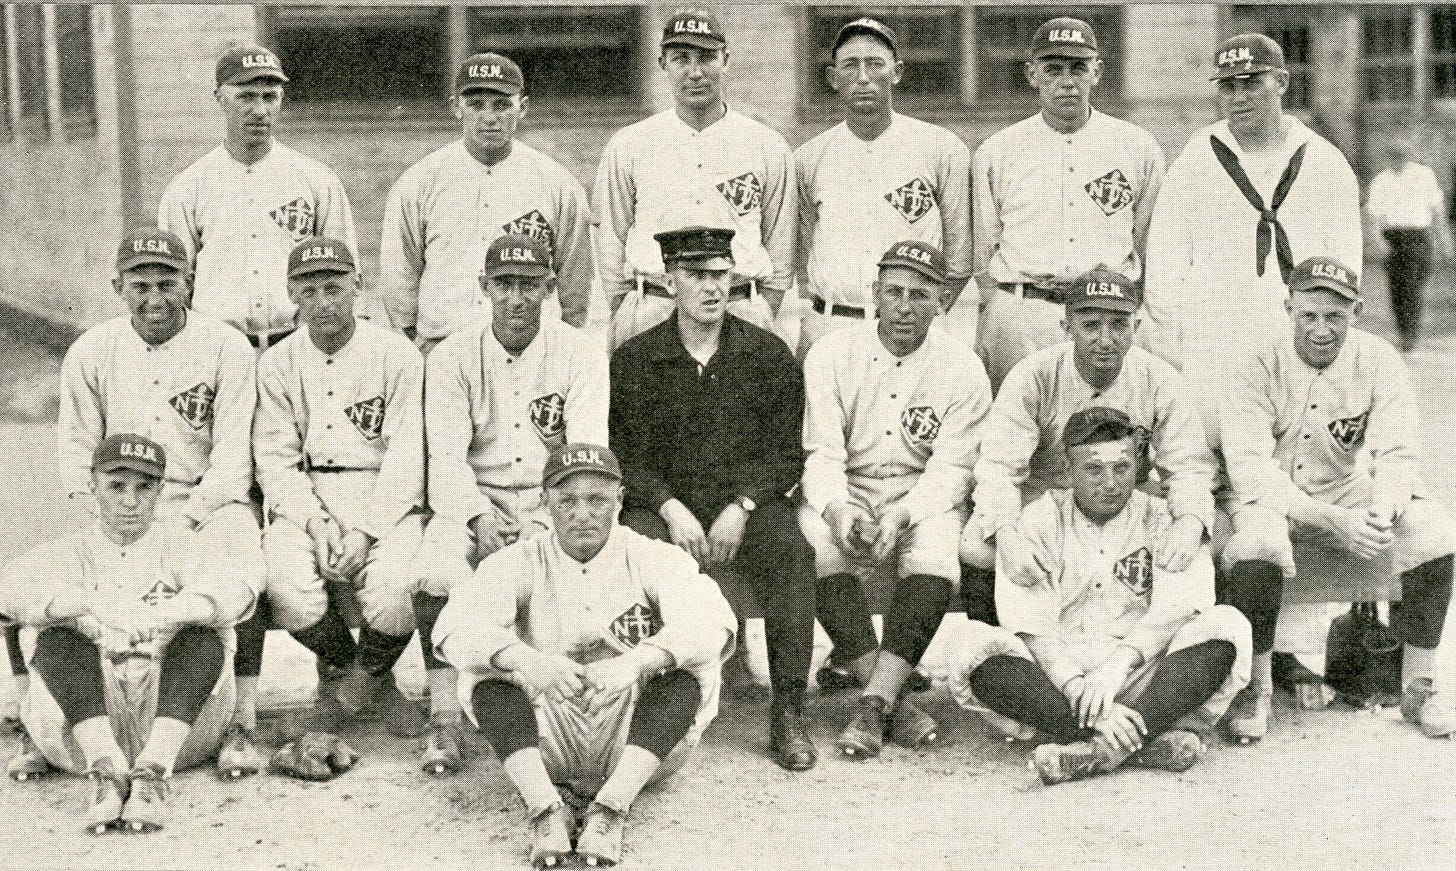 The 1918 Great Lakes baseball team included three players who started on the football team as well. Outfielder George Halas stands second from left. Pitcher Jerry Jones stands third from right and infielder Paddy Driscoll is seated on the far left. (Great Lakes Recruit, July 1918)